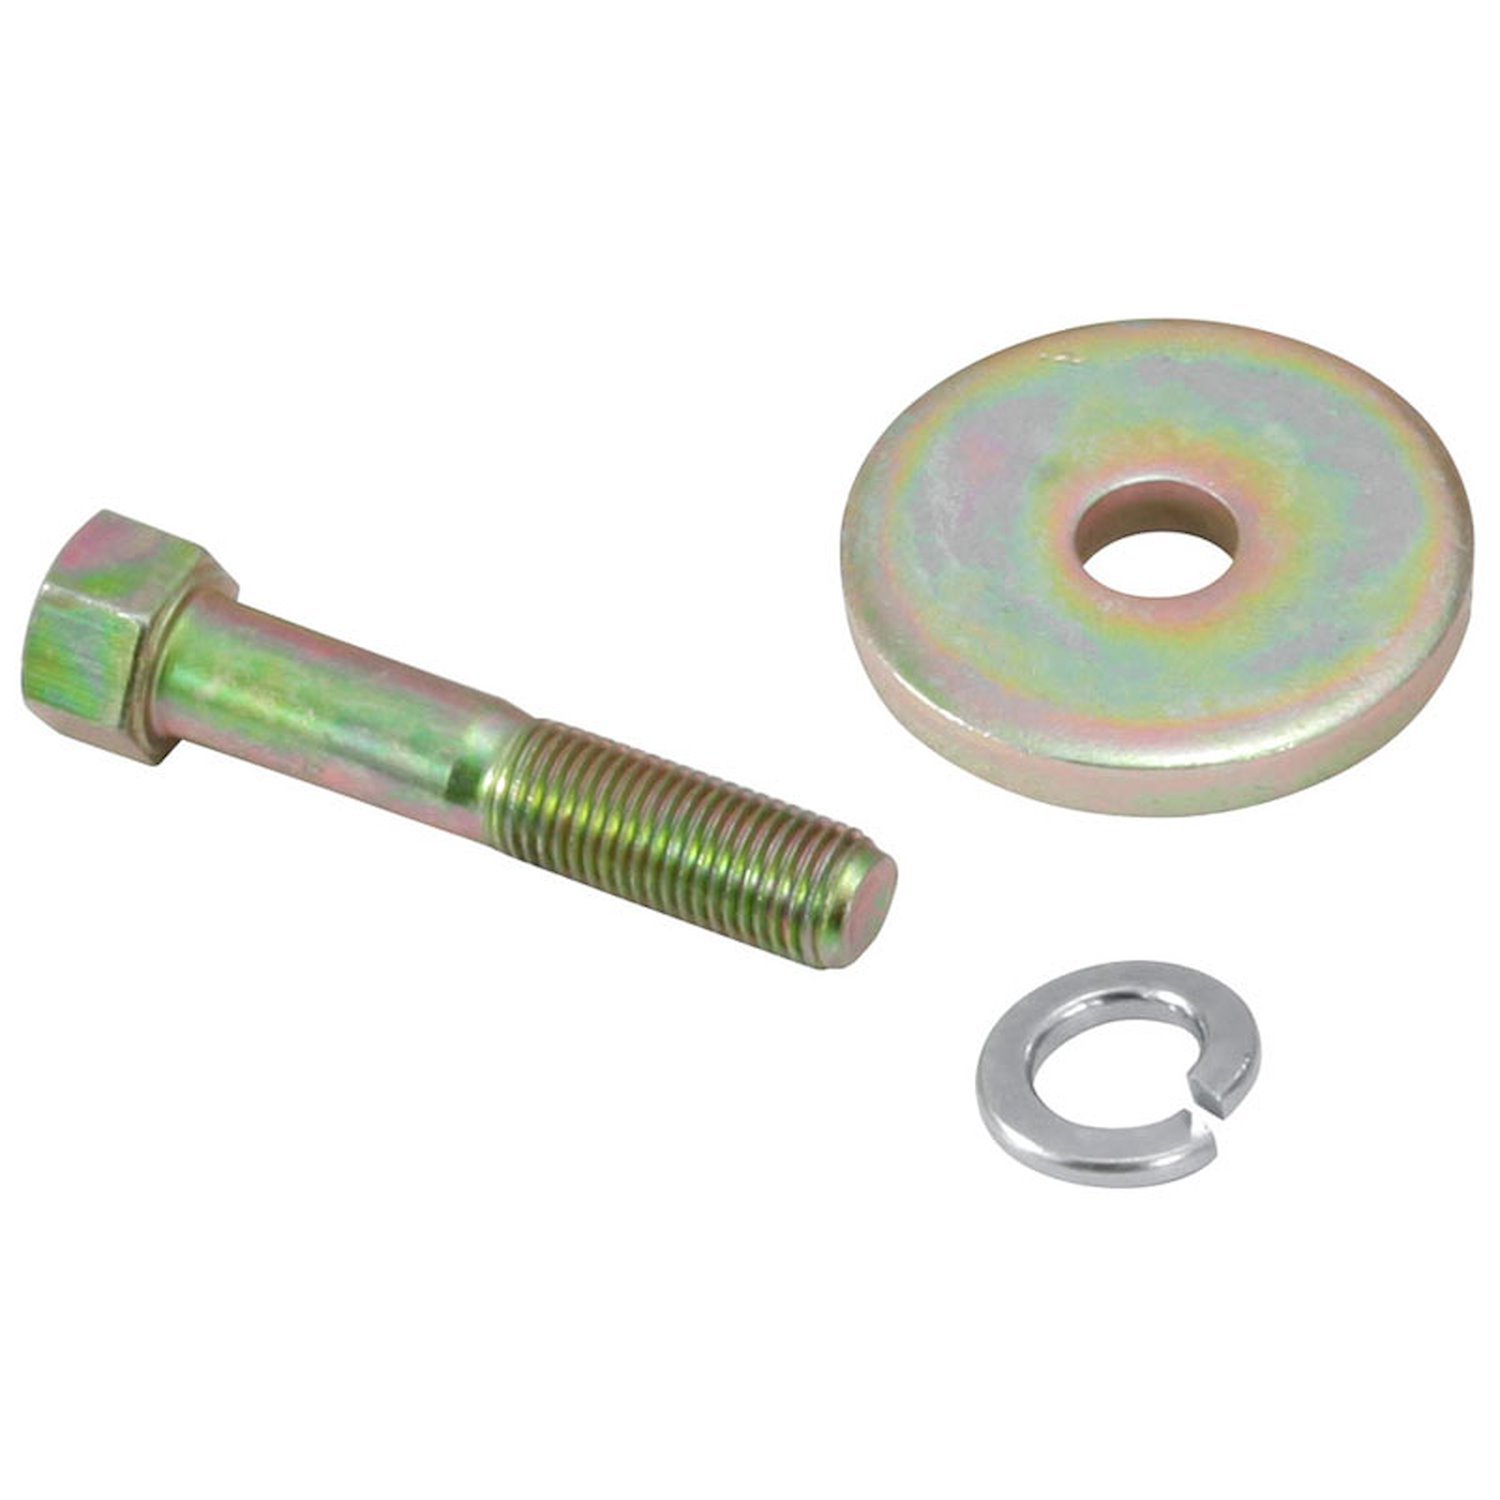 Milodon 84530 7/16-20 x 2 Grade 8 Balancer Bolt with 1/4 Washer for Small Block Chevy 